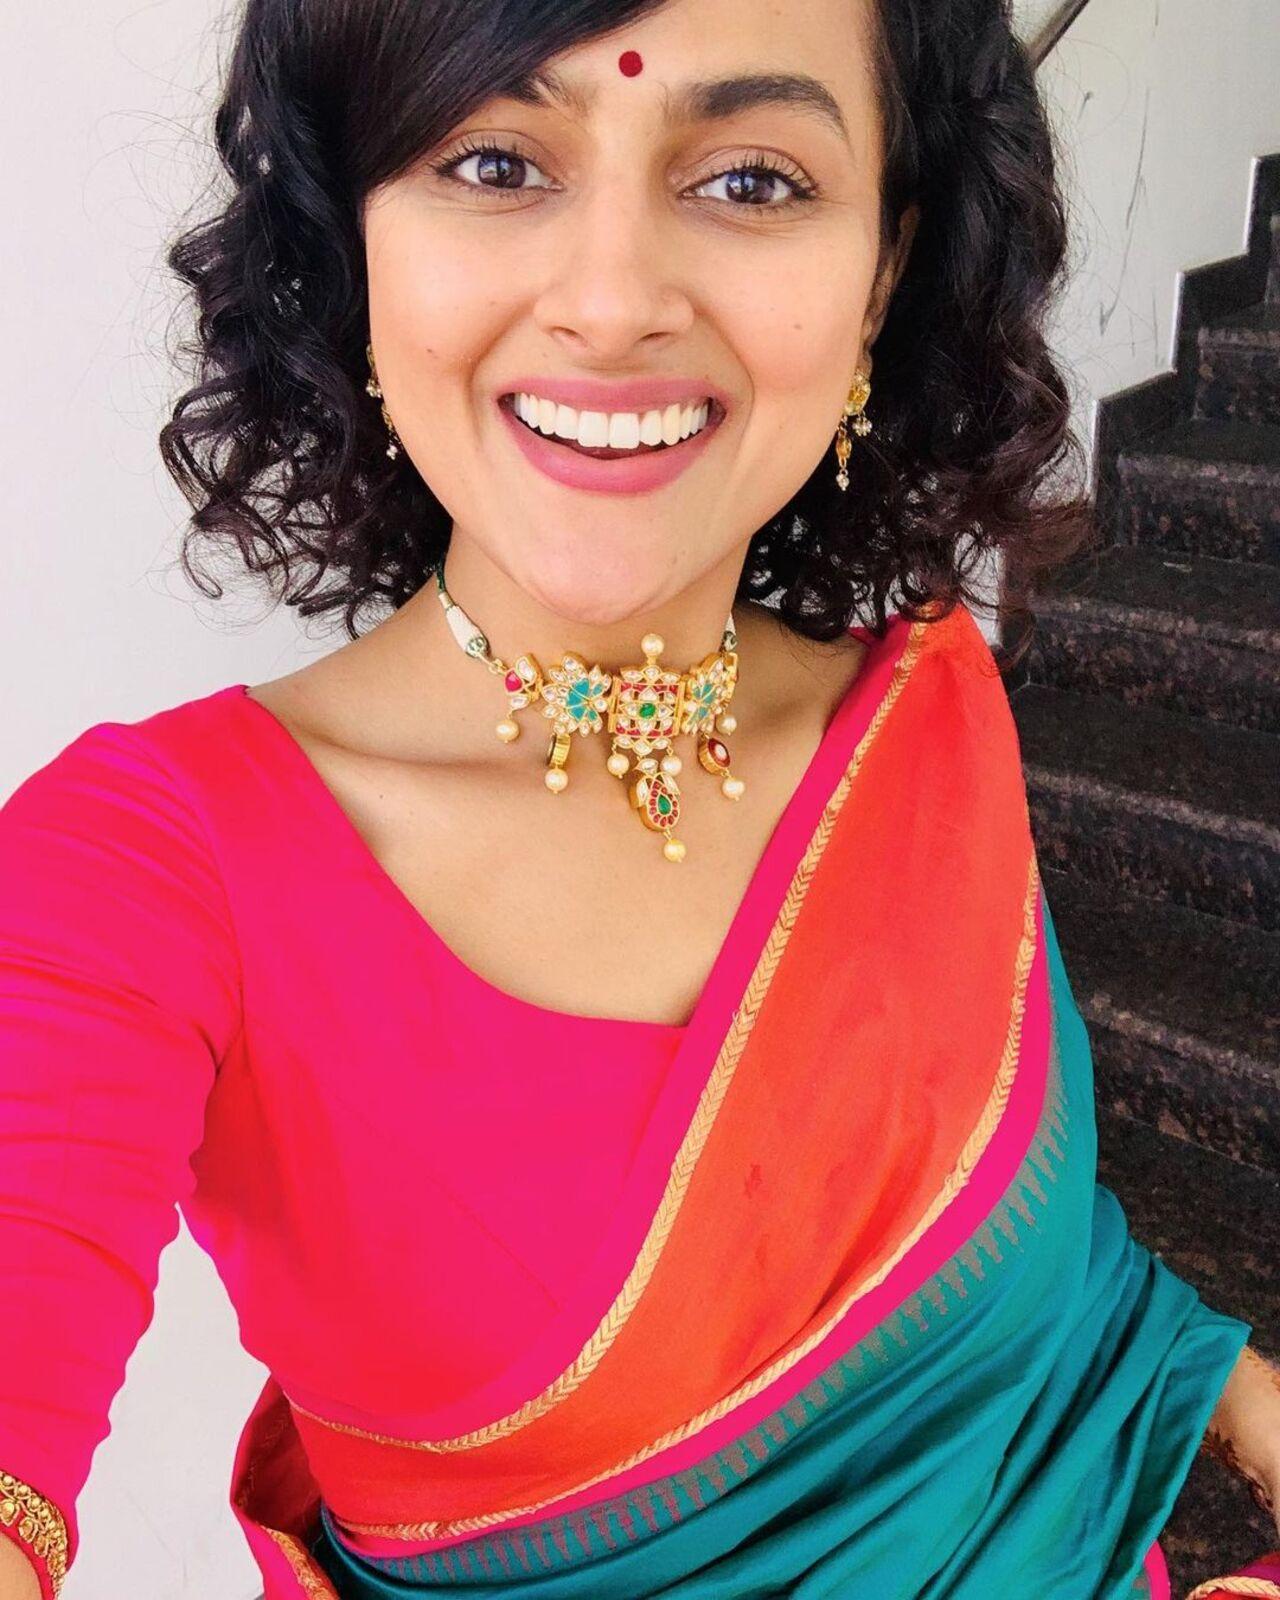 Go for the bold shades of pinks, oranges and green for a traditional feel like actress Shraddha Srinath. Top the look with a pearl choker and a simple bindi.